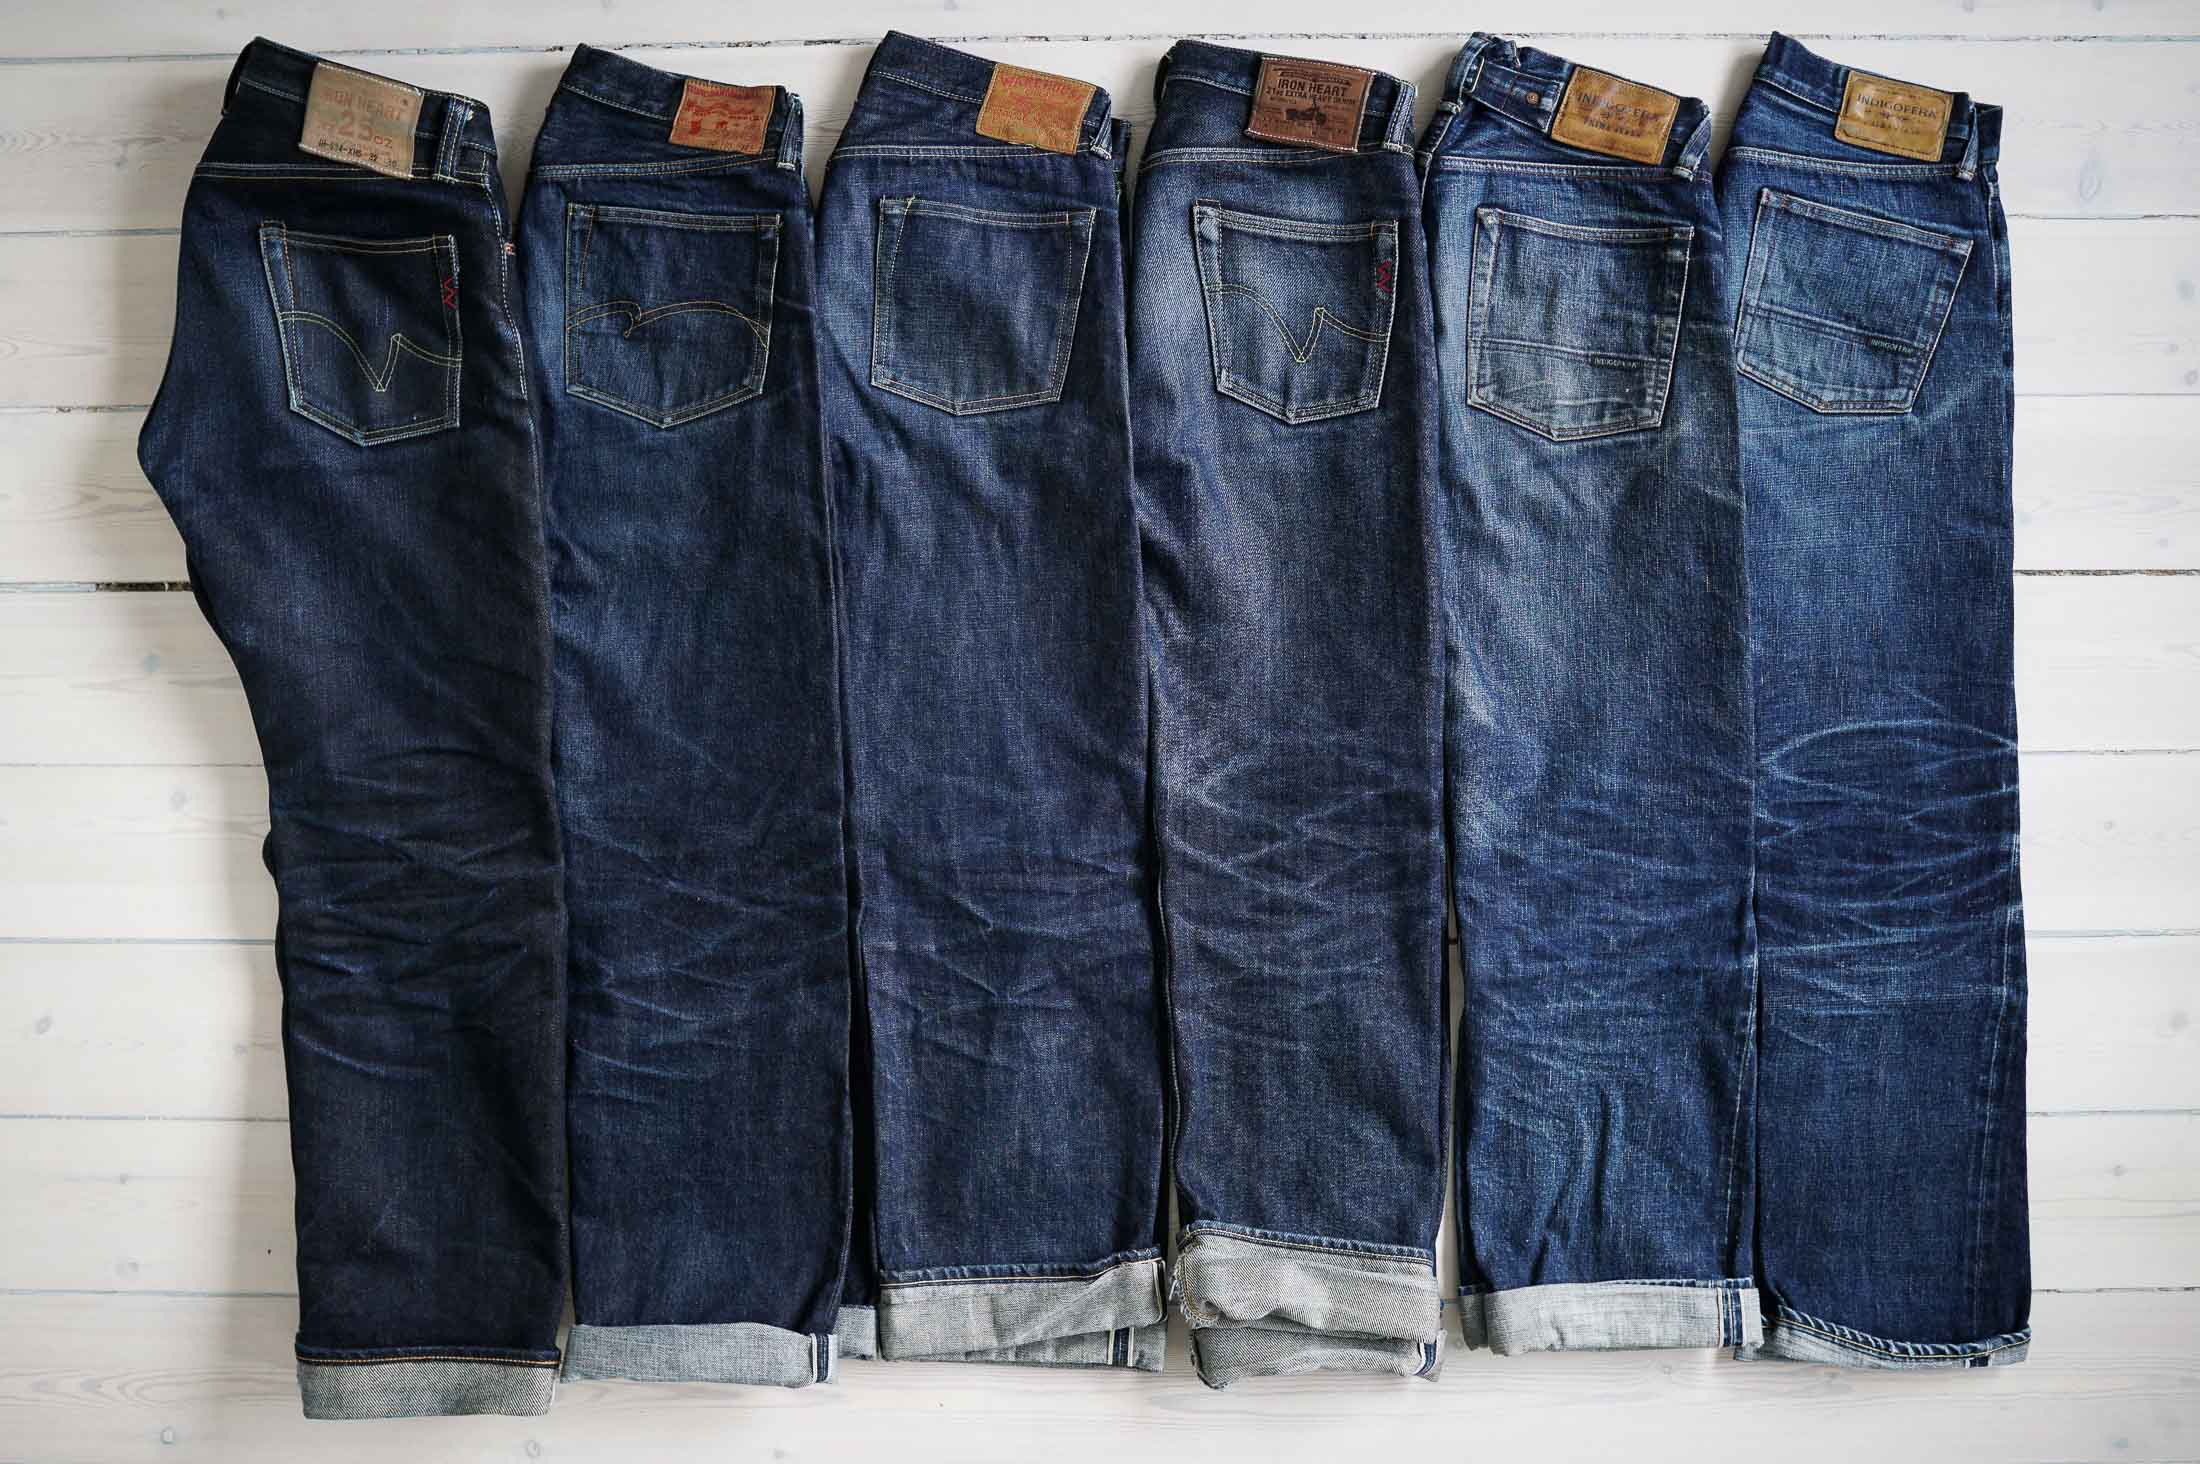 raw denim jeans before and after